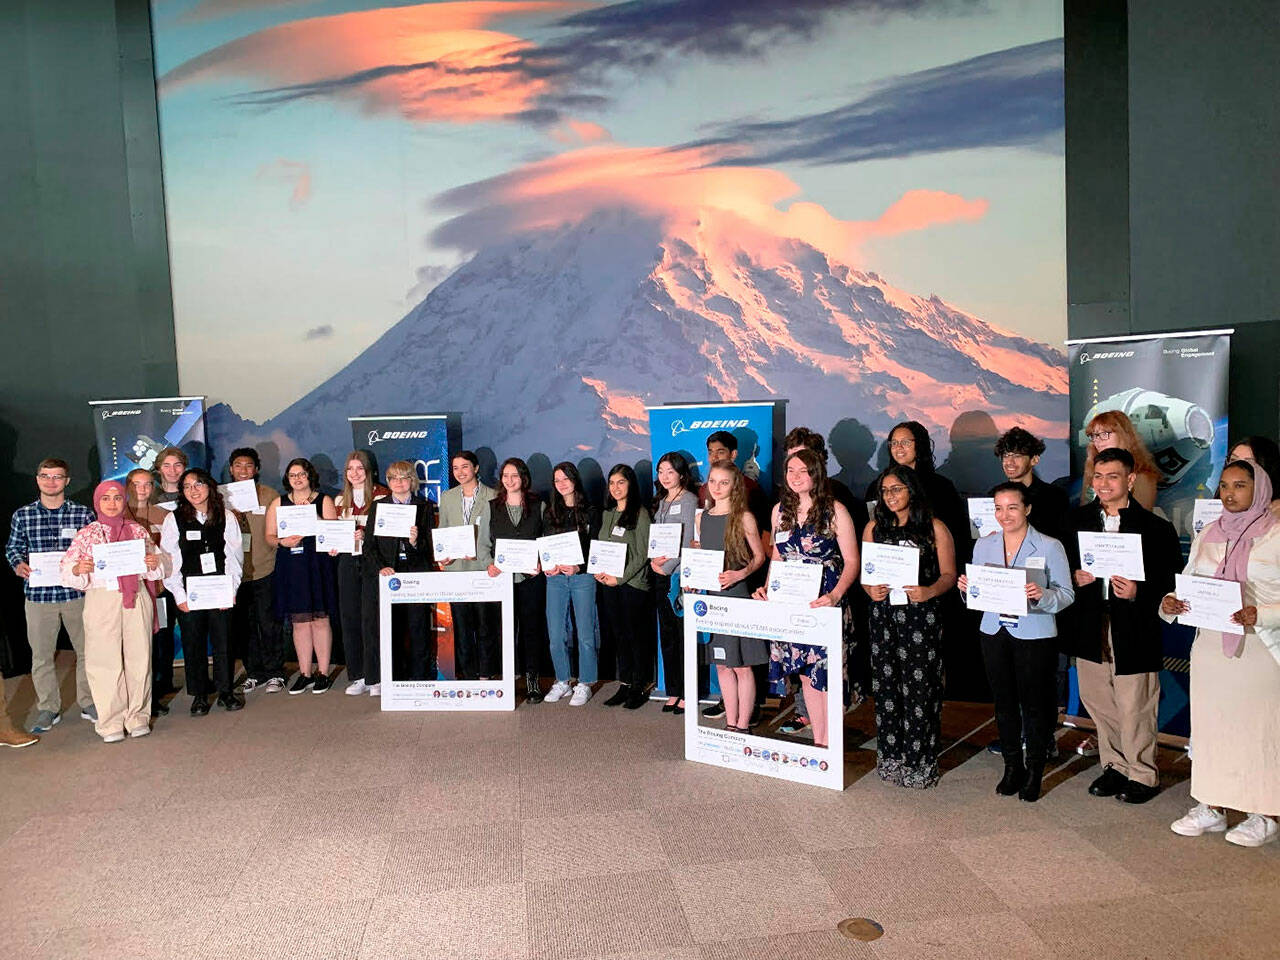 Washington State STEM Signing Day honorees in a group photo at a celebration event on May 22 at the Museum of Flight in Seattle. Three Kent high school students were among those honored. COURTESY PHOTO, Partnership for Learning